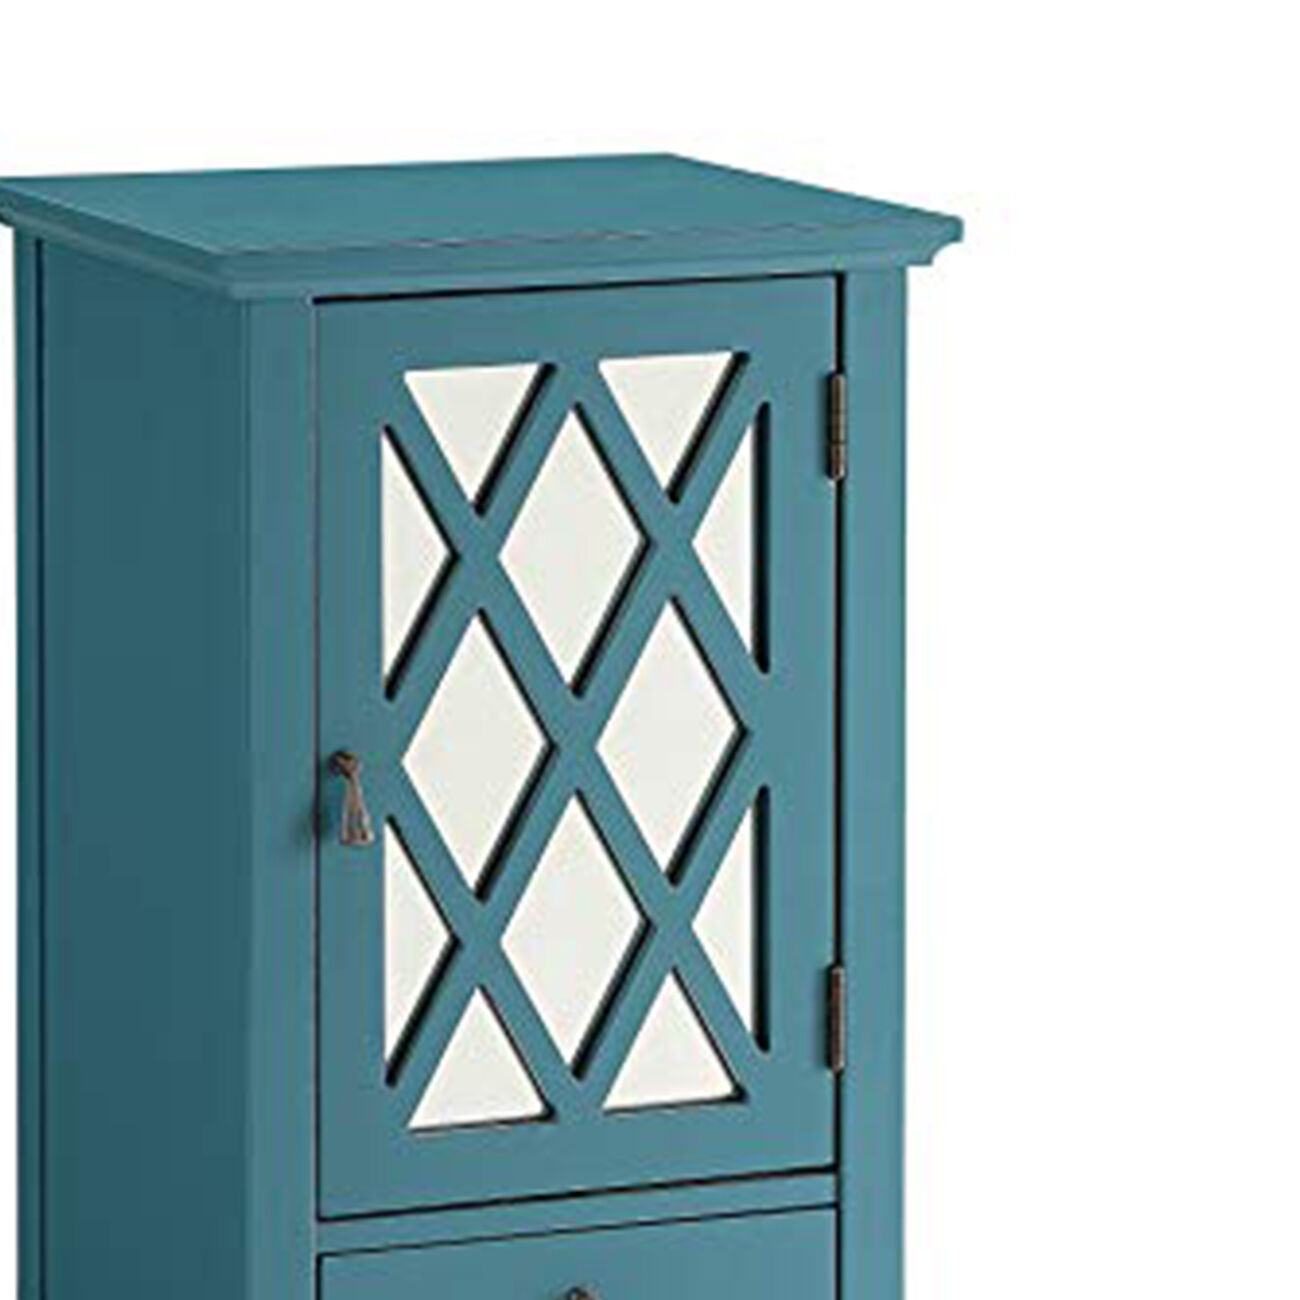 Trendy Side Table, Teal Blue